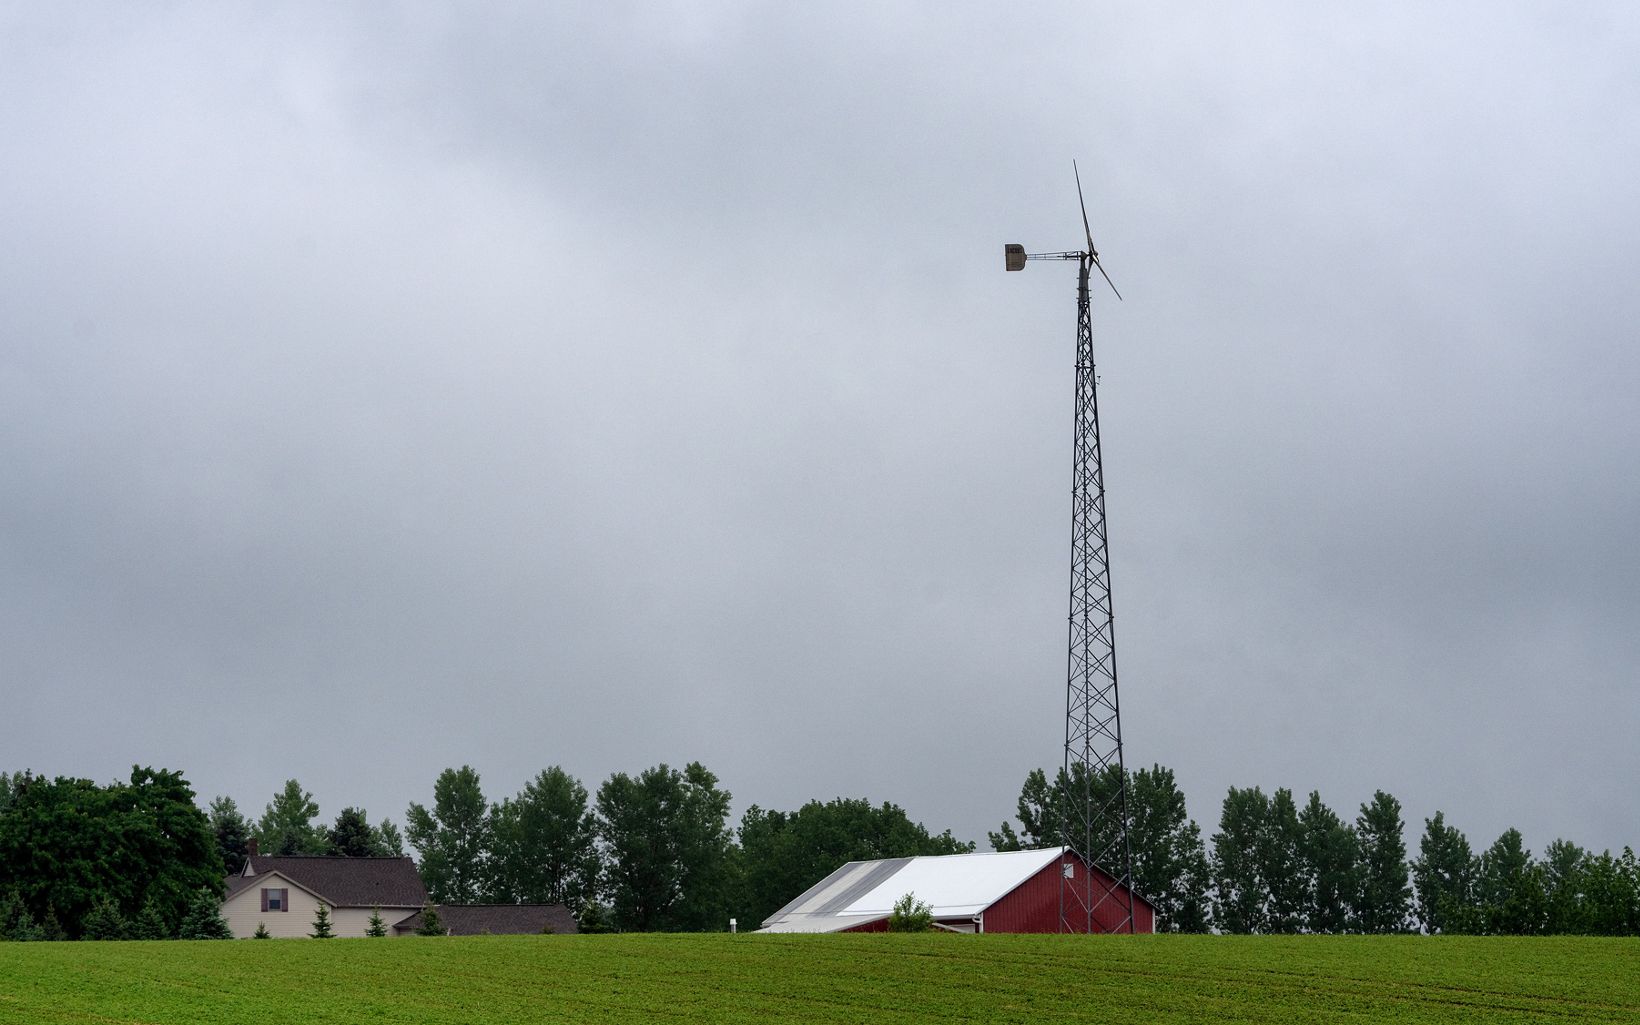 Landscape view of a steel windmill next to a red farm building and a tan house, with a row of trees in the background.